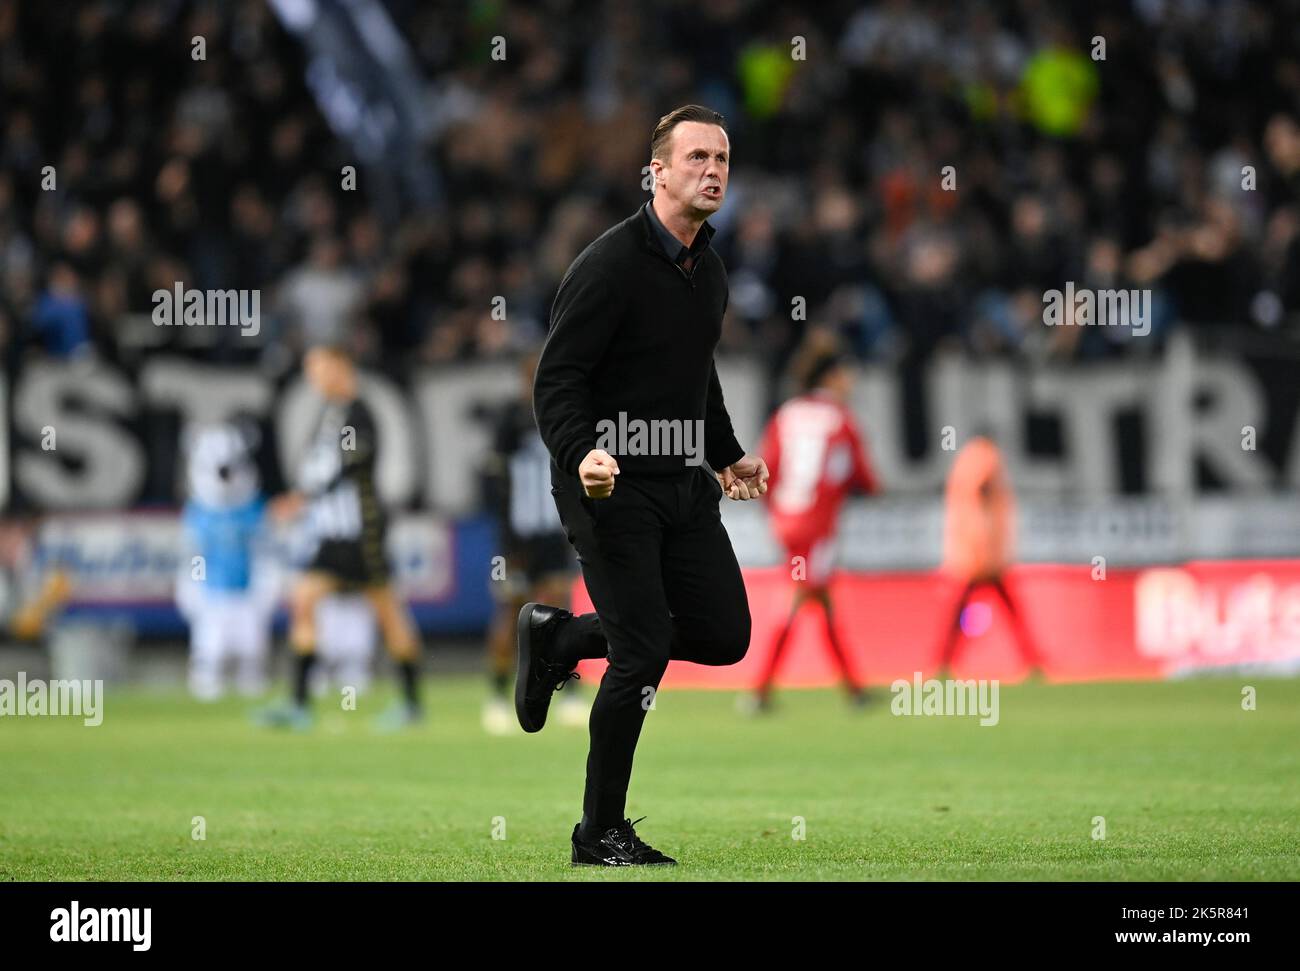 Standard's head coach Ronny Deila celebrates after winning and during a soccer match between Sporting Charleroi and Standard Liege, Sunday 09 October 2022 in Charleroi, on day 11 of the 2022-2023 'Jupiler Pro League' first division of the Belgian championship. BELGA PHOTO JOHN THYS Stock Photo